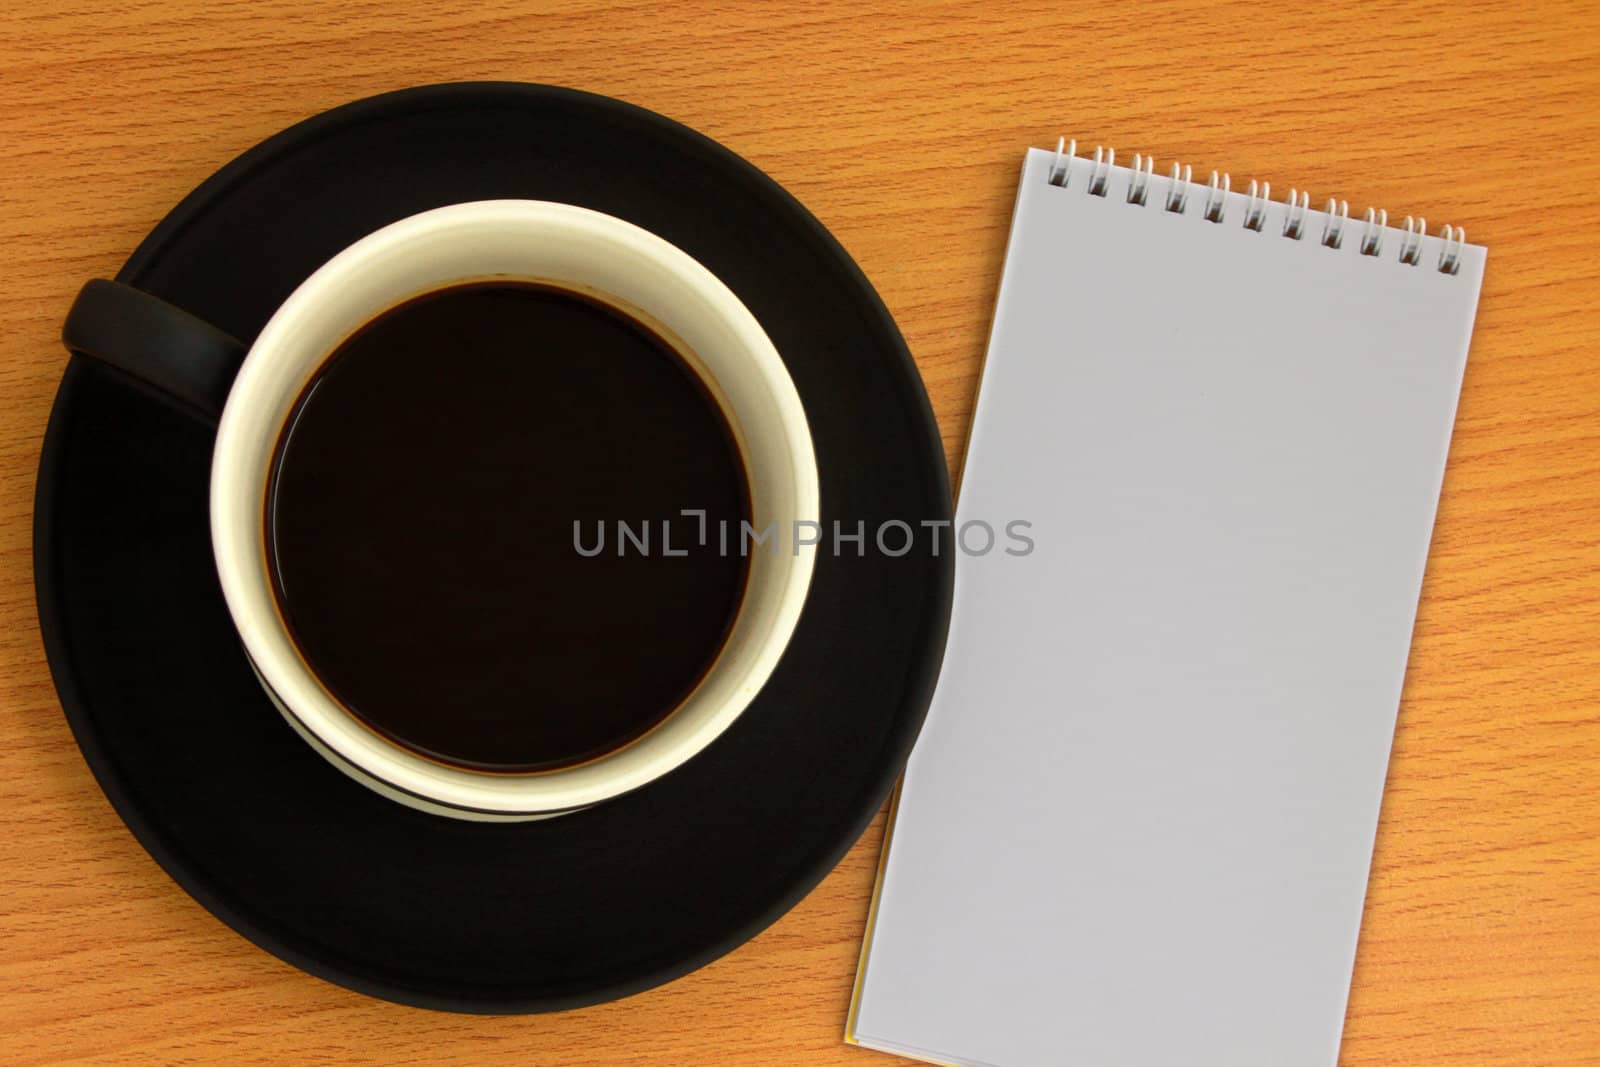 Coffee cup and white notebook